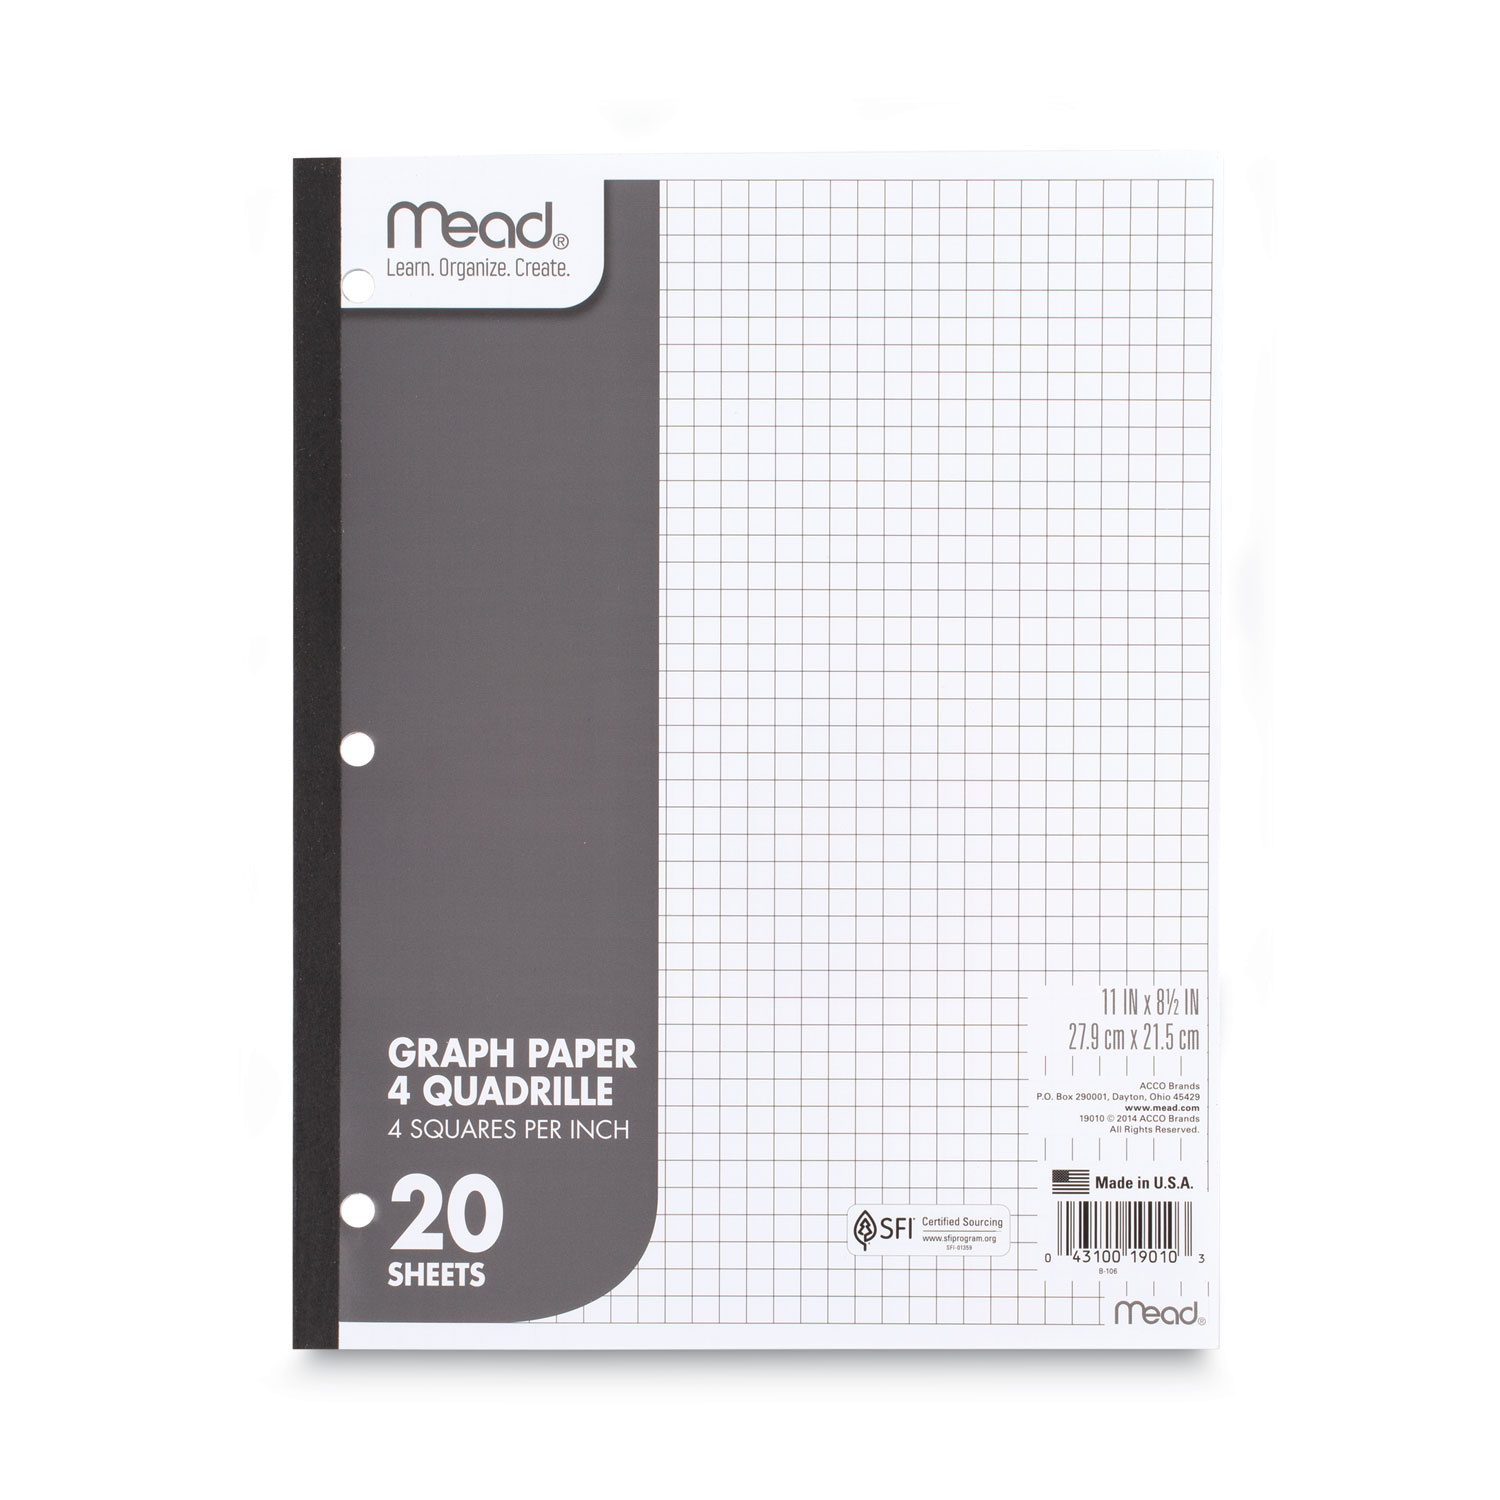  Thermal Paper 8.5 x 11 Inch- Continuous Folding